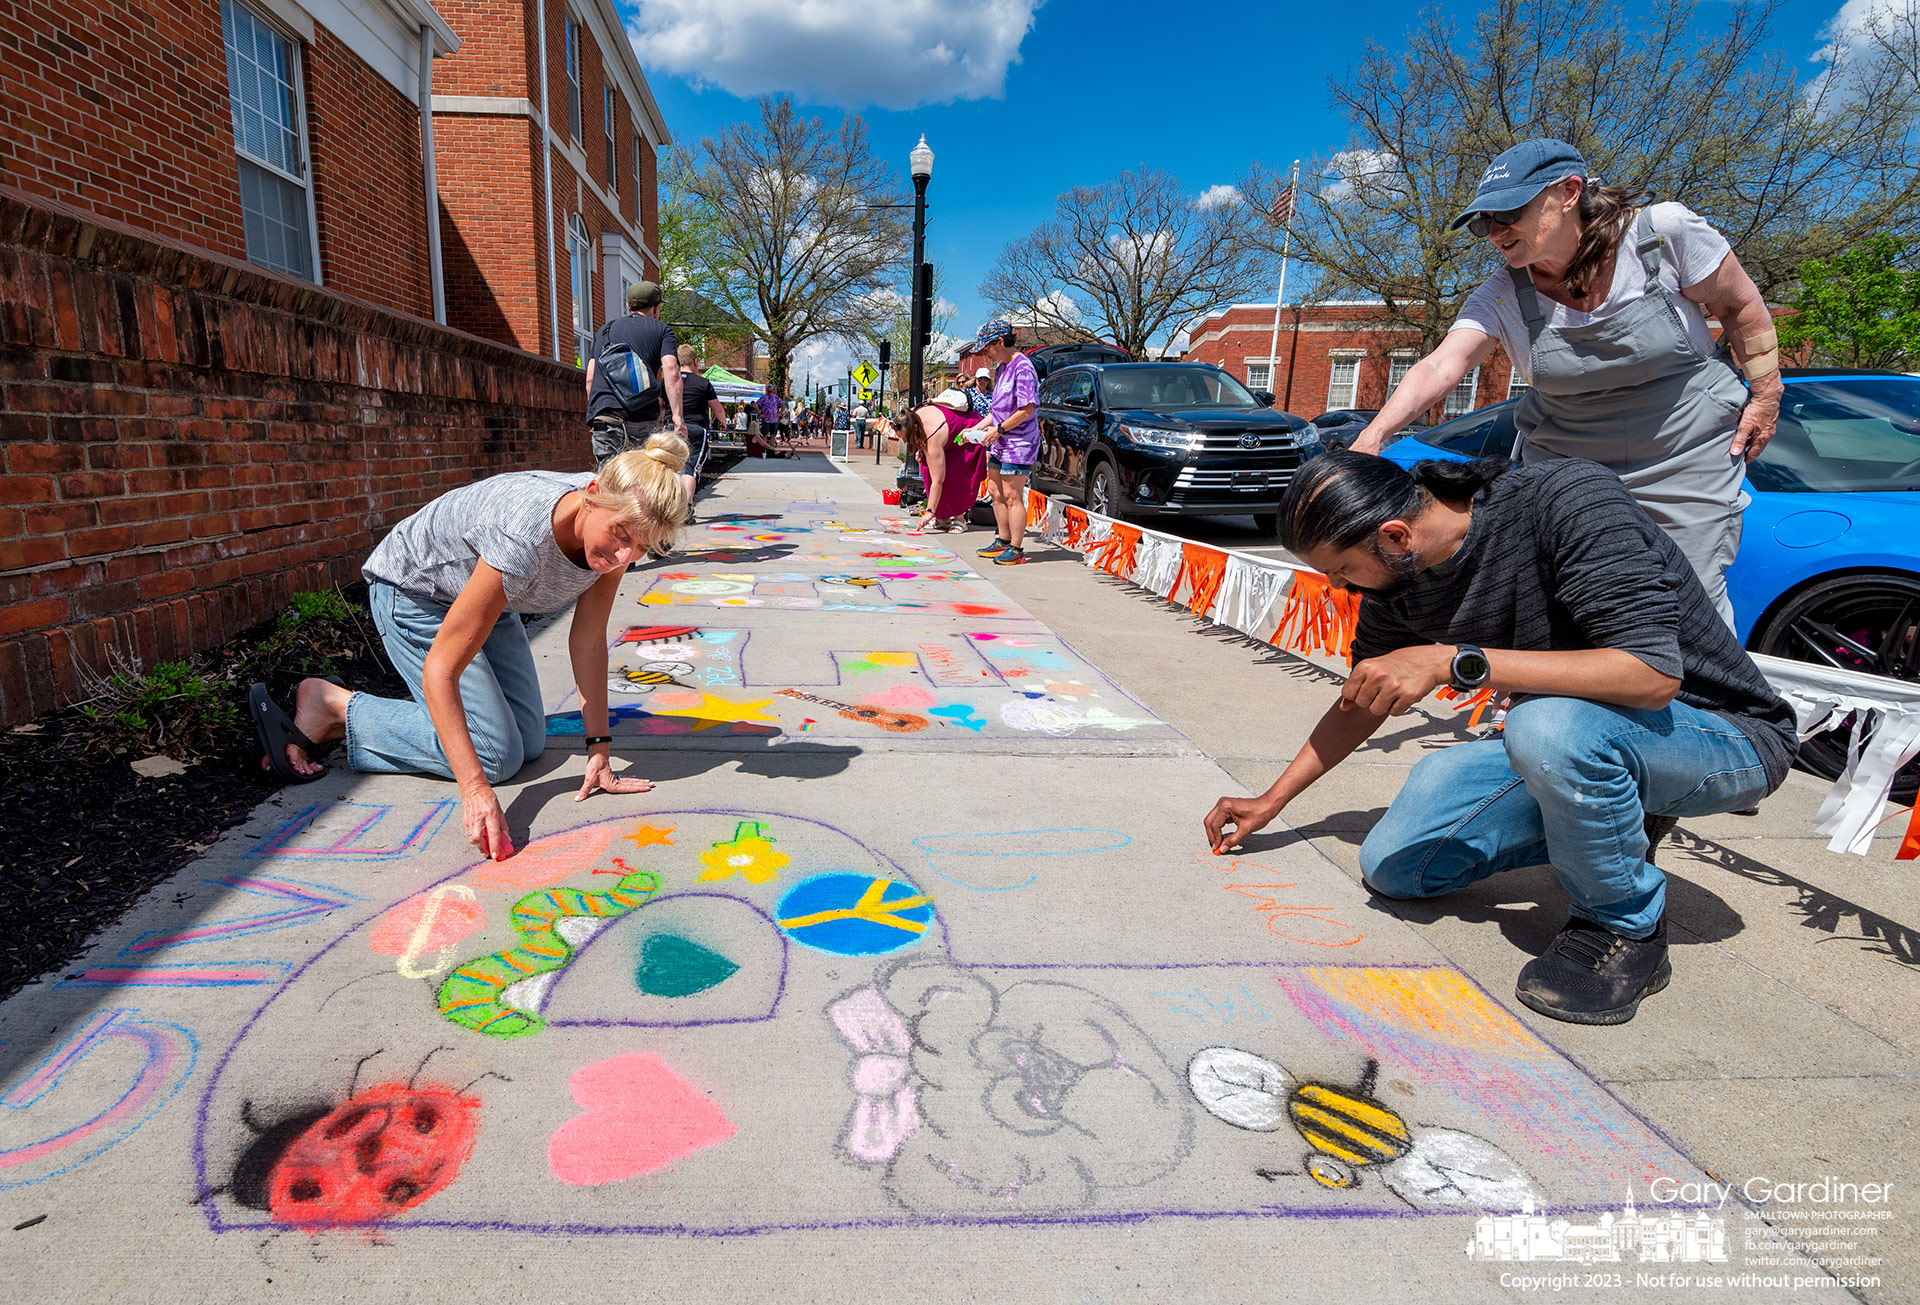 Amateur artists get instructions on completing a chalk mural proclaiming "Give Peace A Chance" on the sidewalk in front of city hall during the Art Hop in Uptown Westerville Saturday. My Final Photo for April 15, 2023.